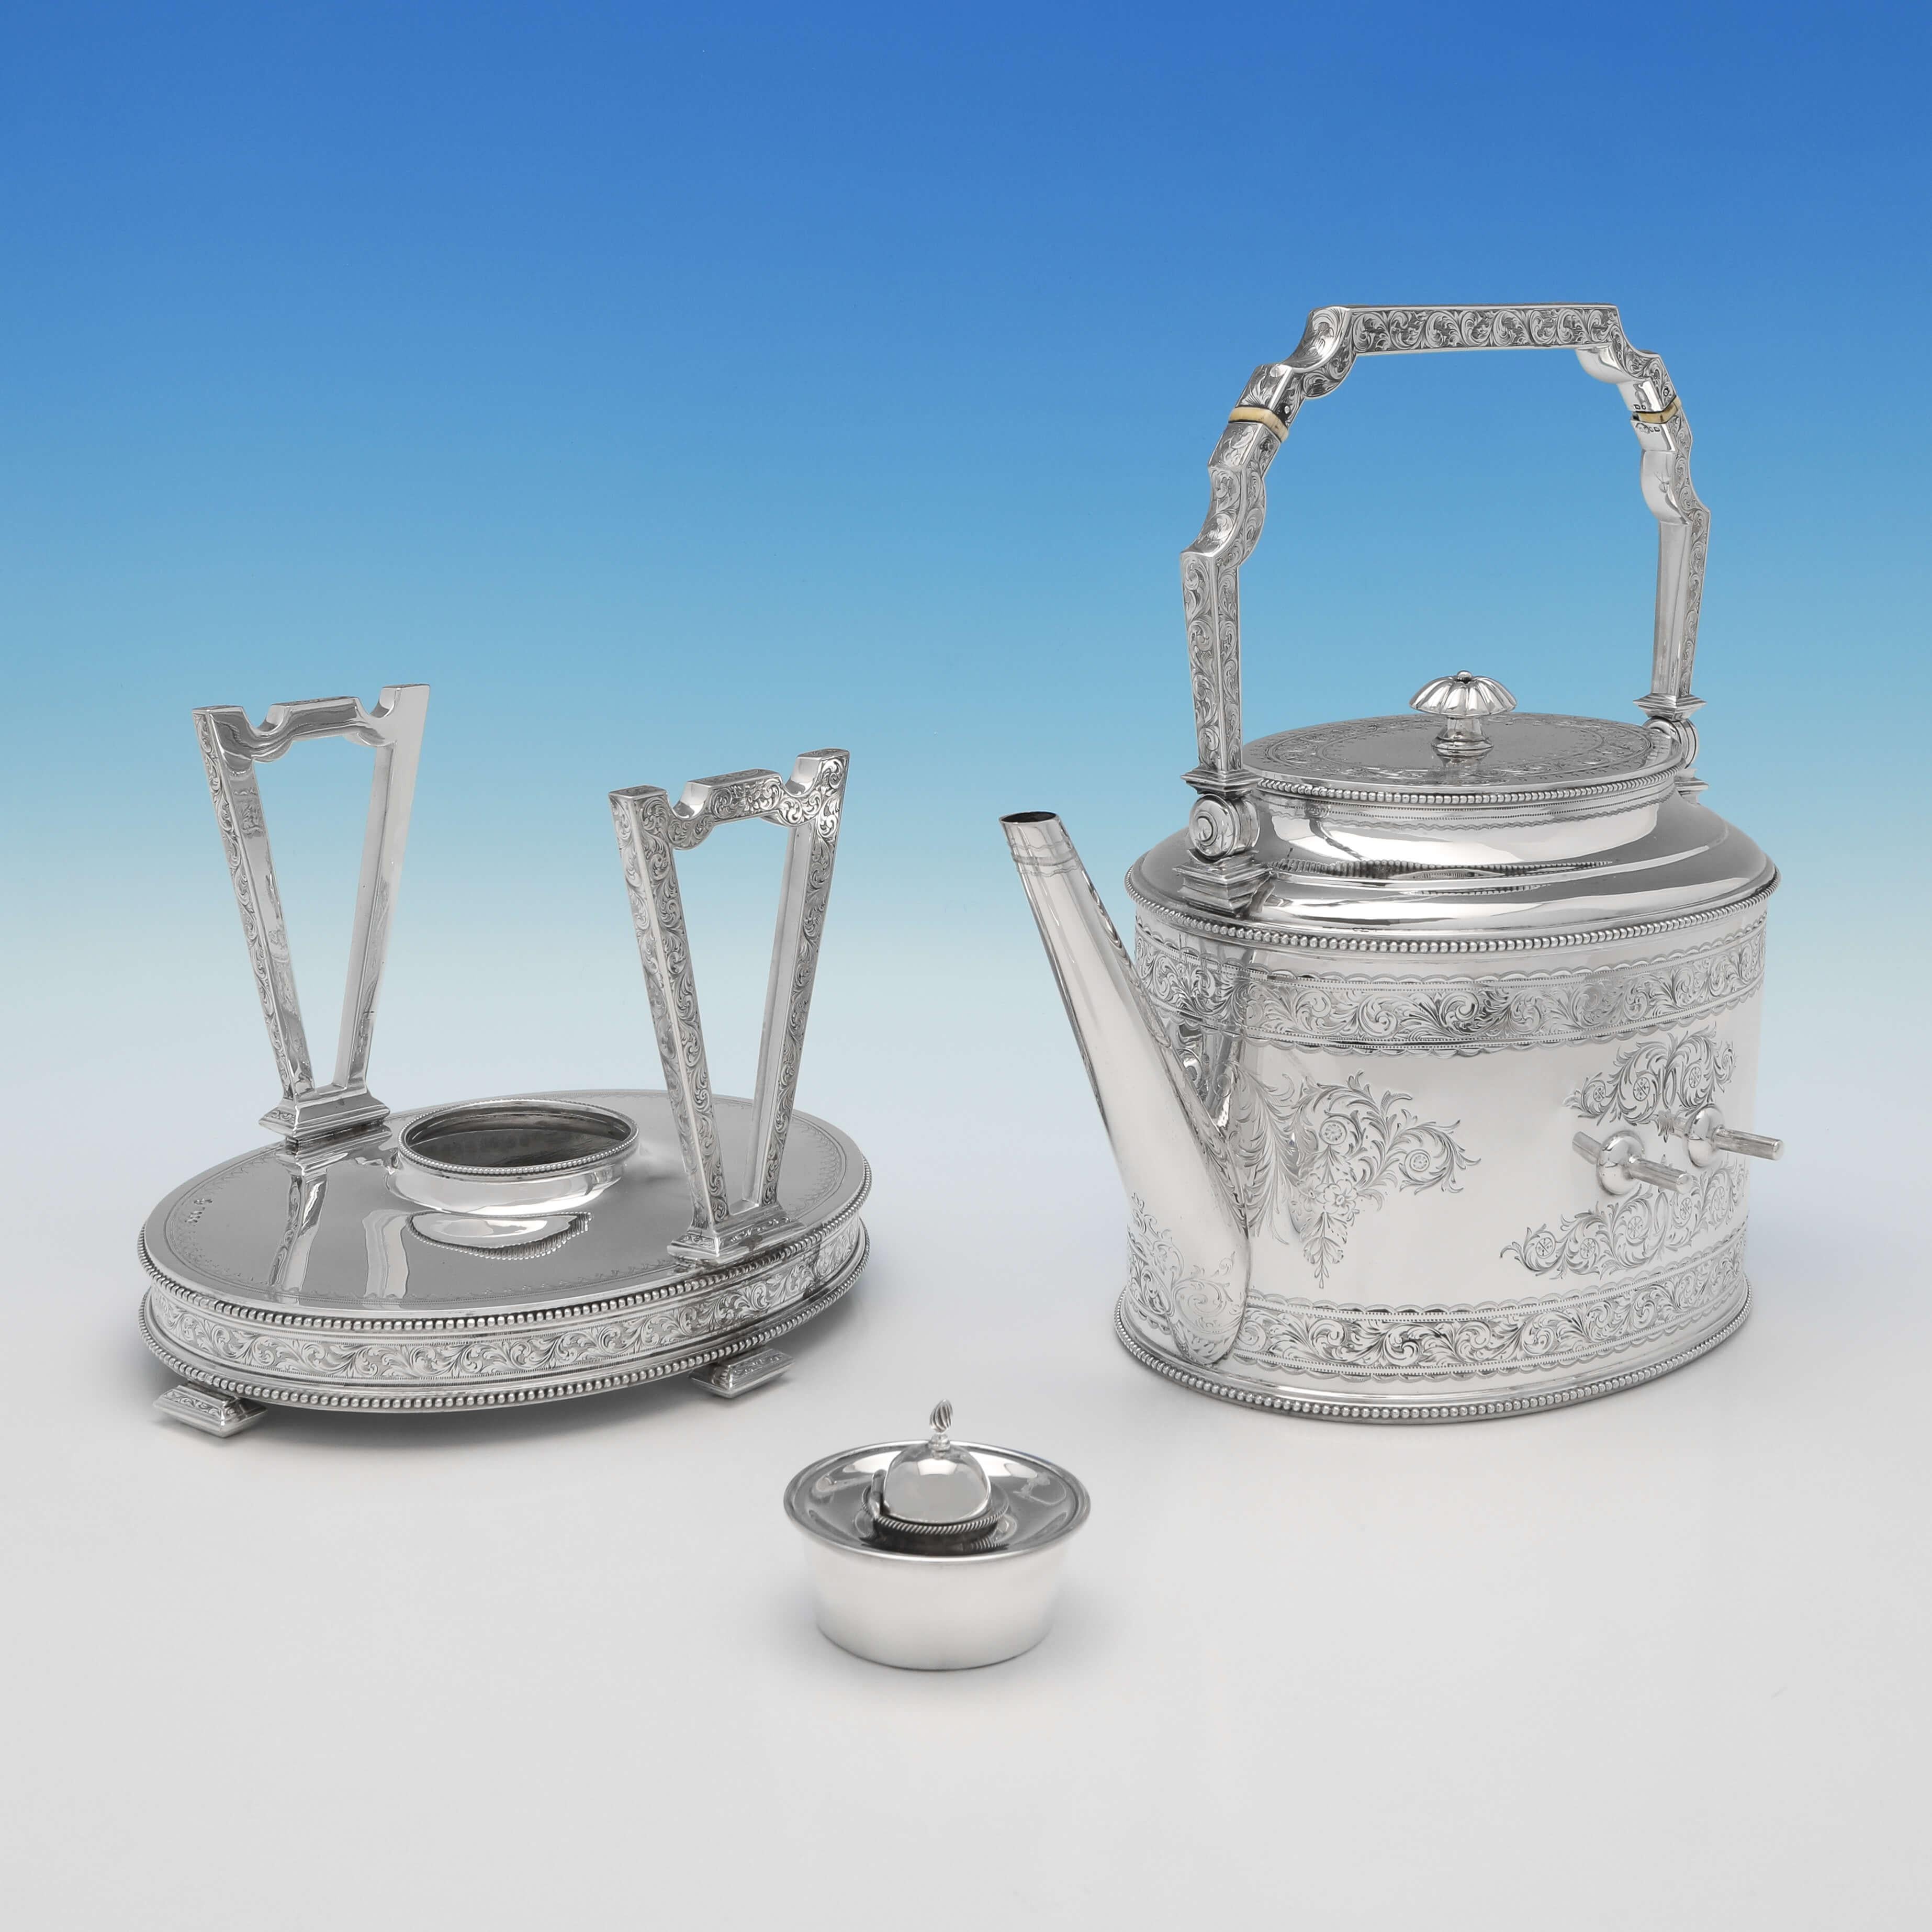 Hallmarked in London in 1870 by John Kilpatrick (over stamping Elkington most likely), this very attractive, Victorian, Antique Sterling Silver Kettle, is in the 'Can Shape' and features engraved decoration throughout. The kettle measures